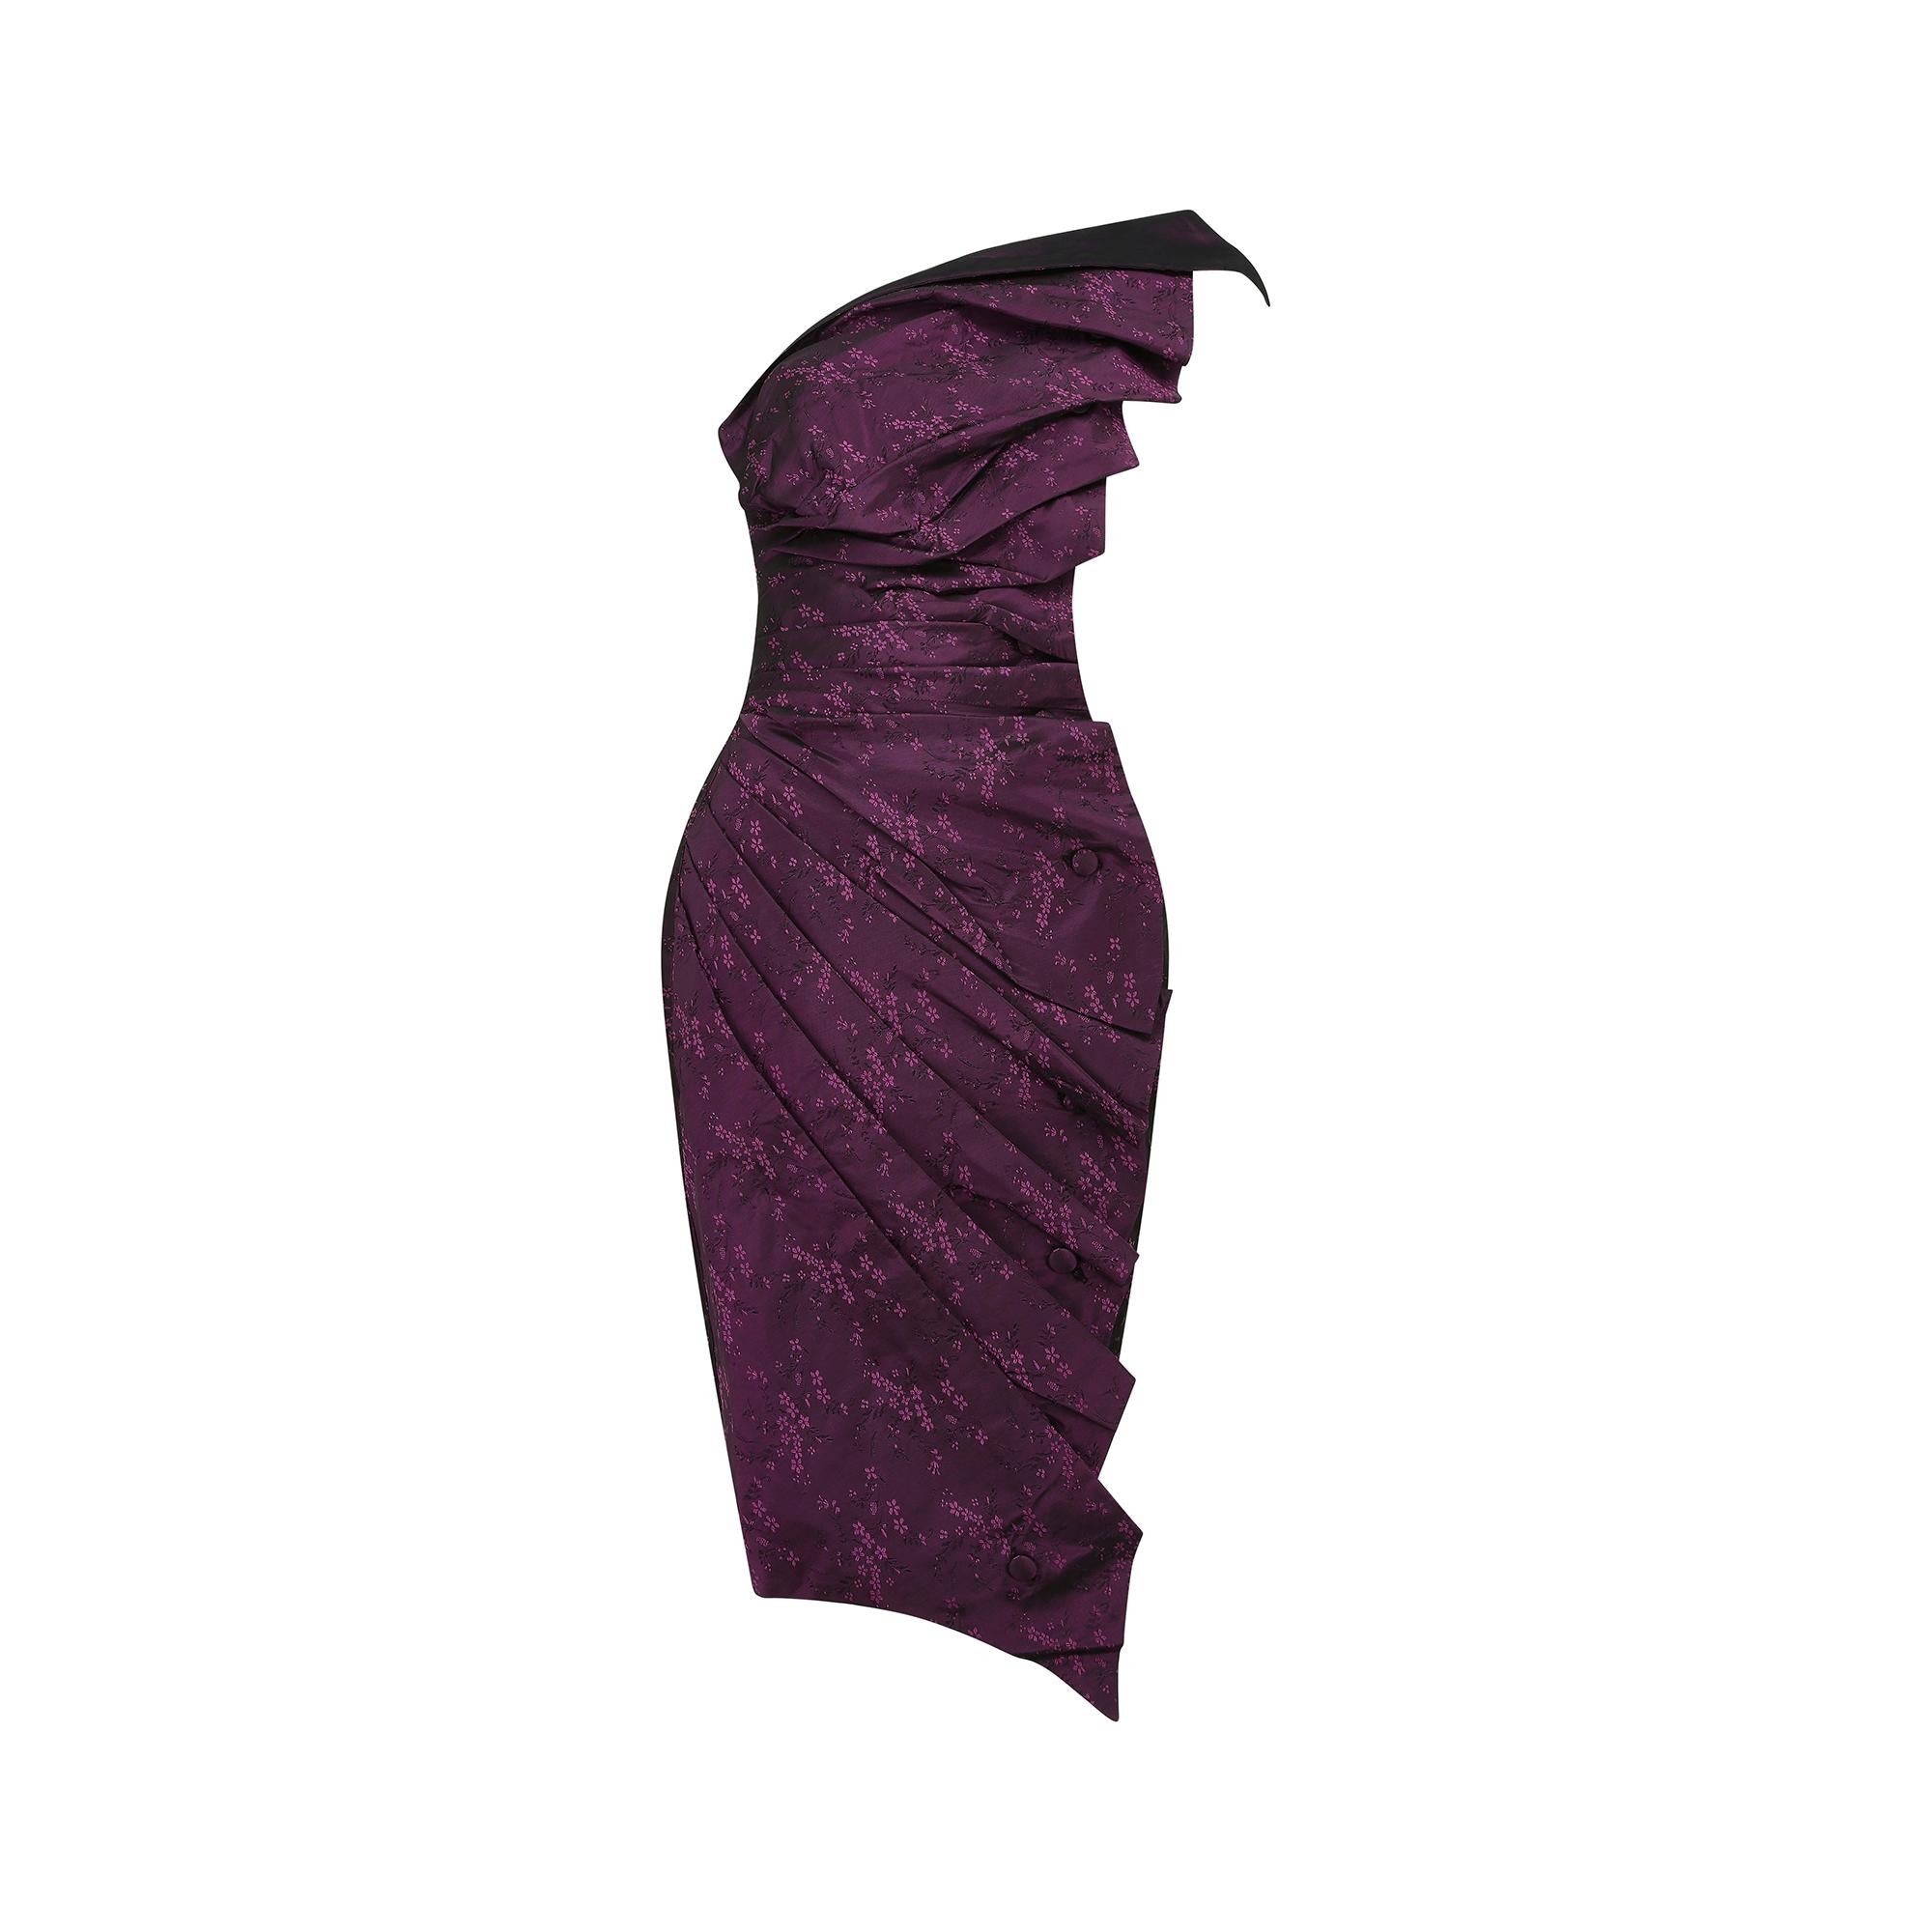 Fine and rare 1986 'bird dress' by legendary British designer Antony Price who created some of the most exclusive and glamourous evening wear of the 1970s and 1980s. The fabric is a glowing plum hued floral jacquard silk which catches the light and